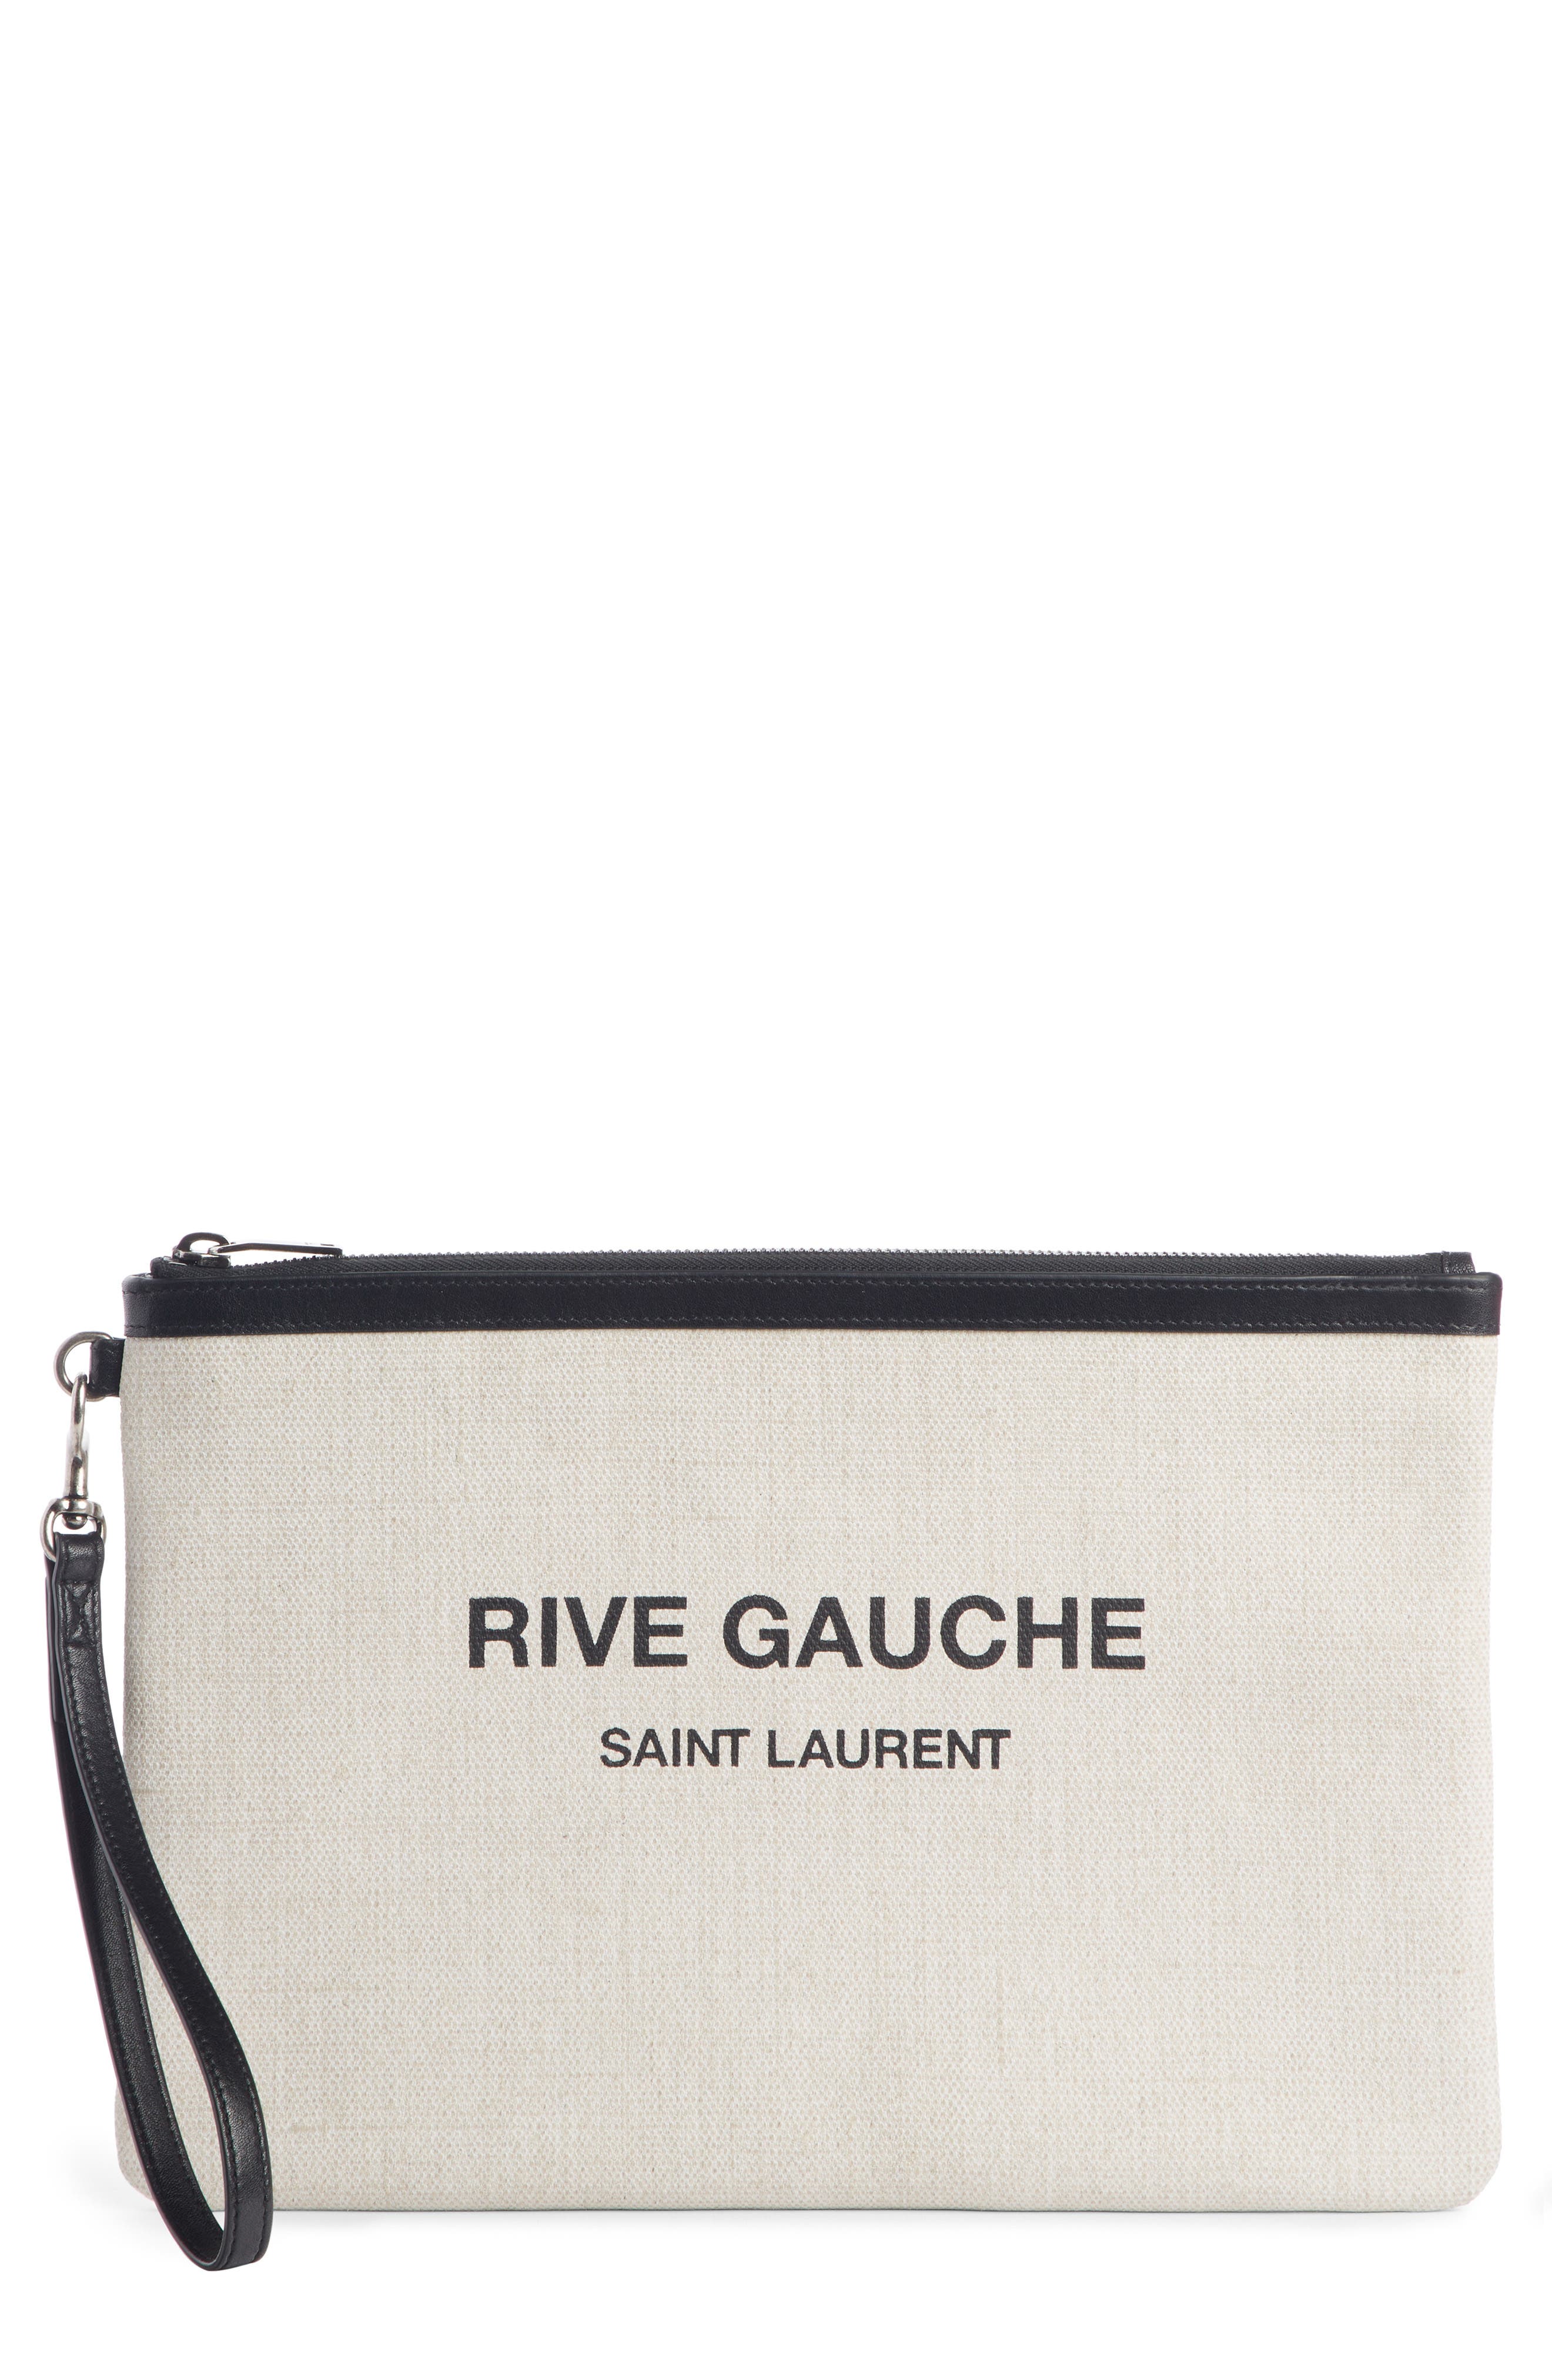 Saint Laurent Rive Gauche Canvas Pouch in Lino Bianco/Nero at Nordstrom